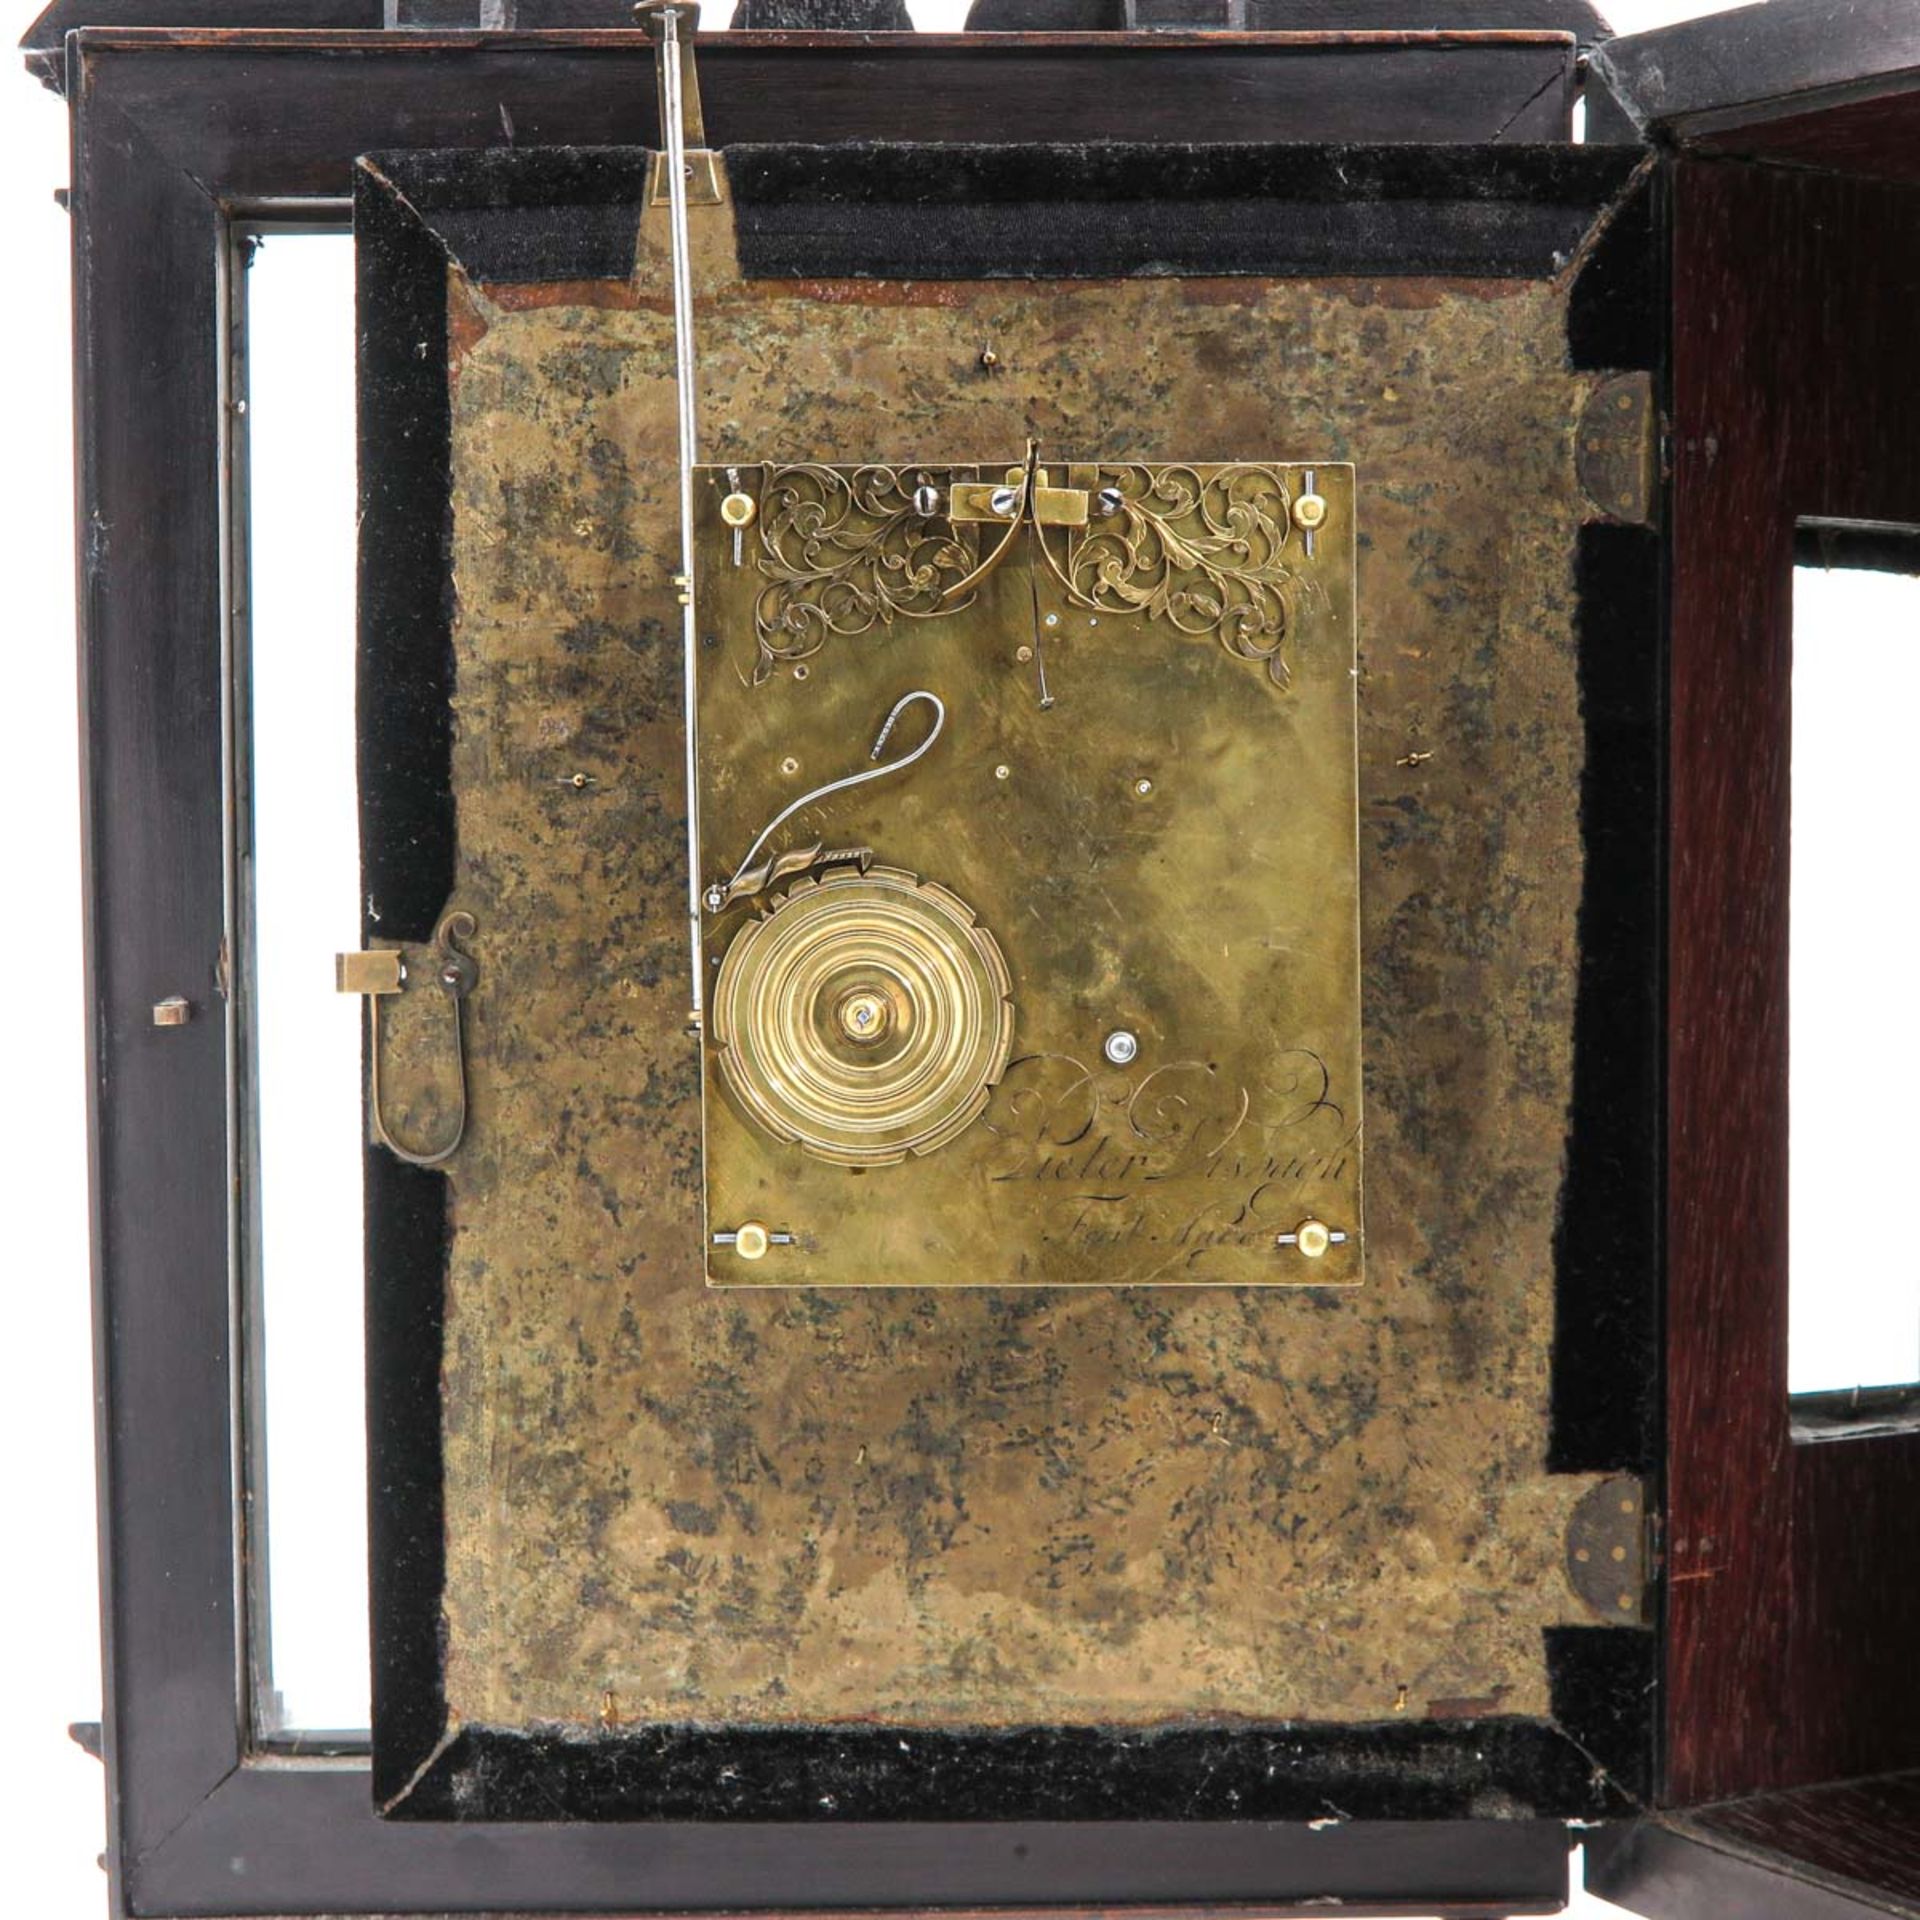 A 17th Century Hague Clock or Haagsche Klok Signed Pieter Visbagh - Image 7 of 9